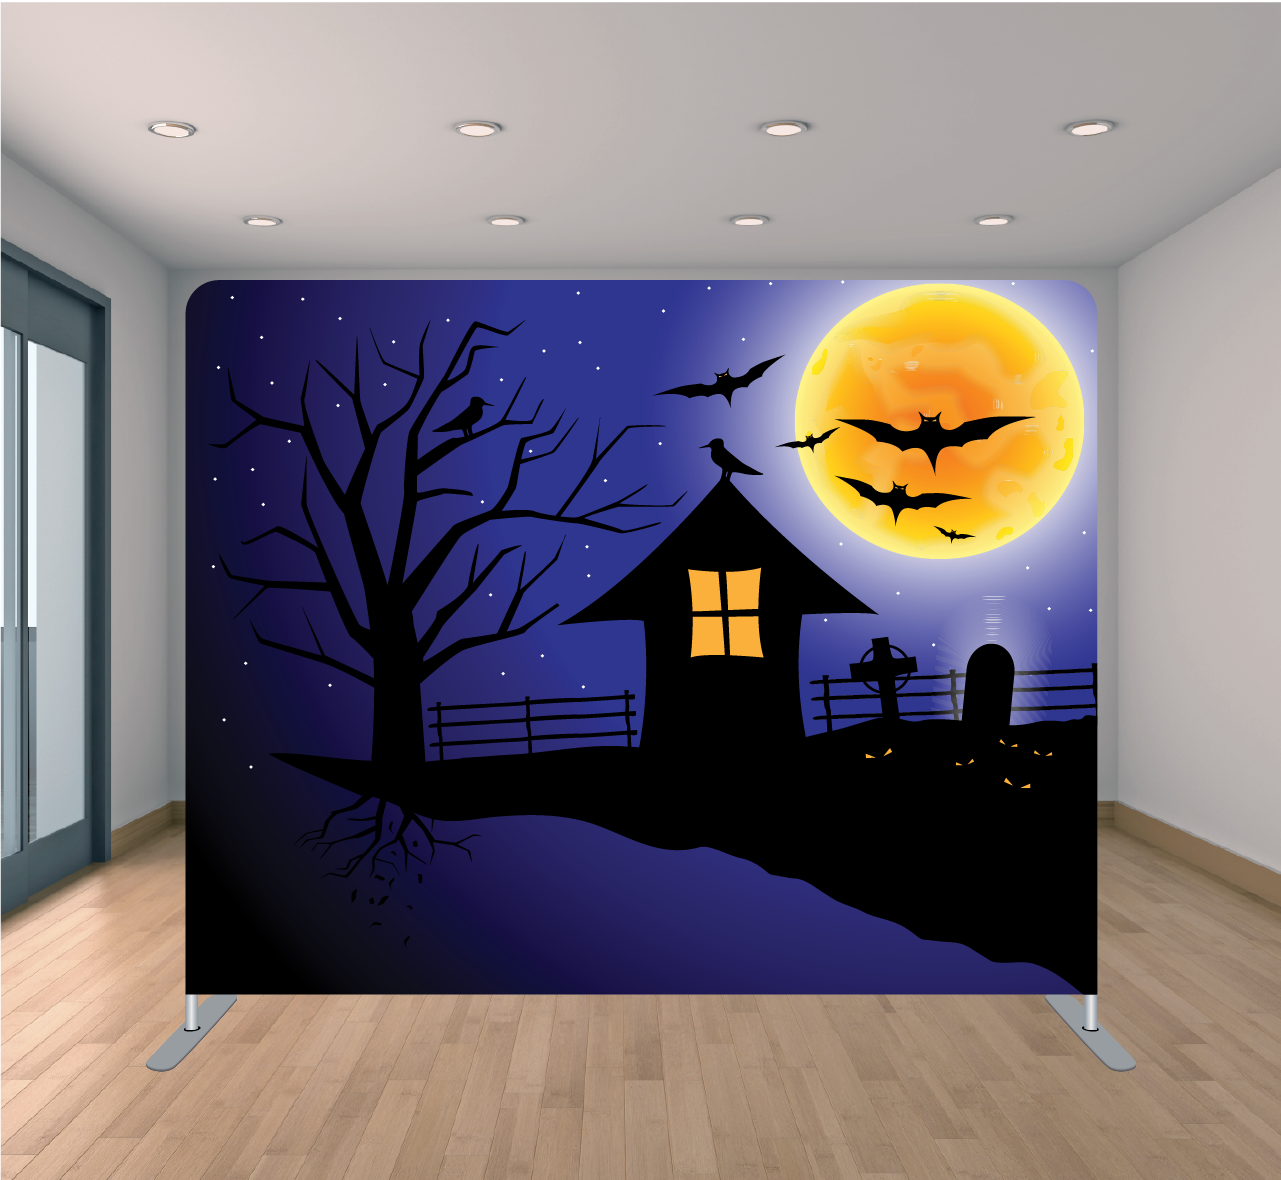 8x8ft Pillowcase Tension Backdrop- Haunted House 1